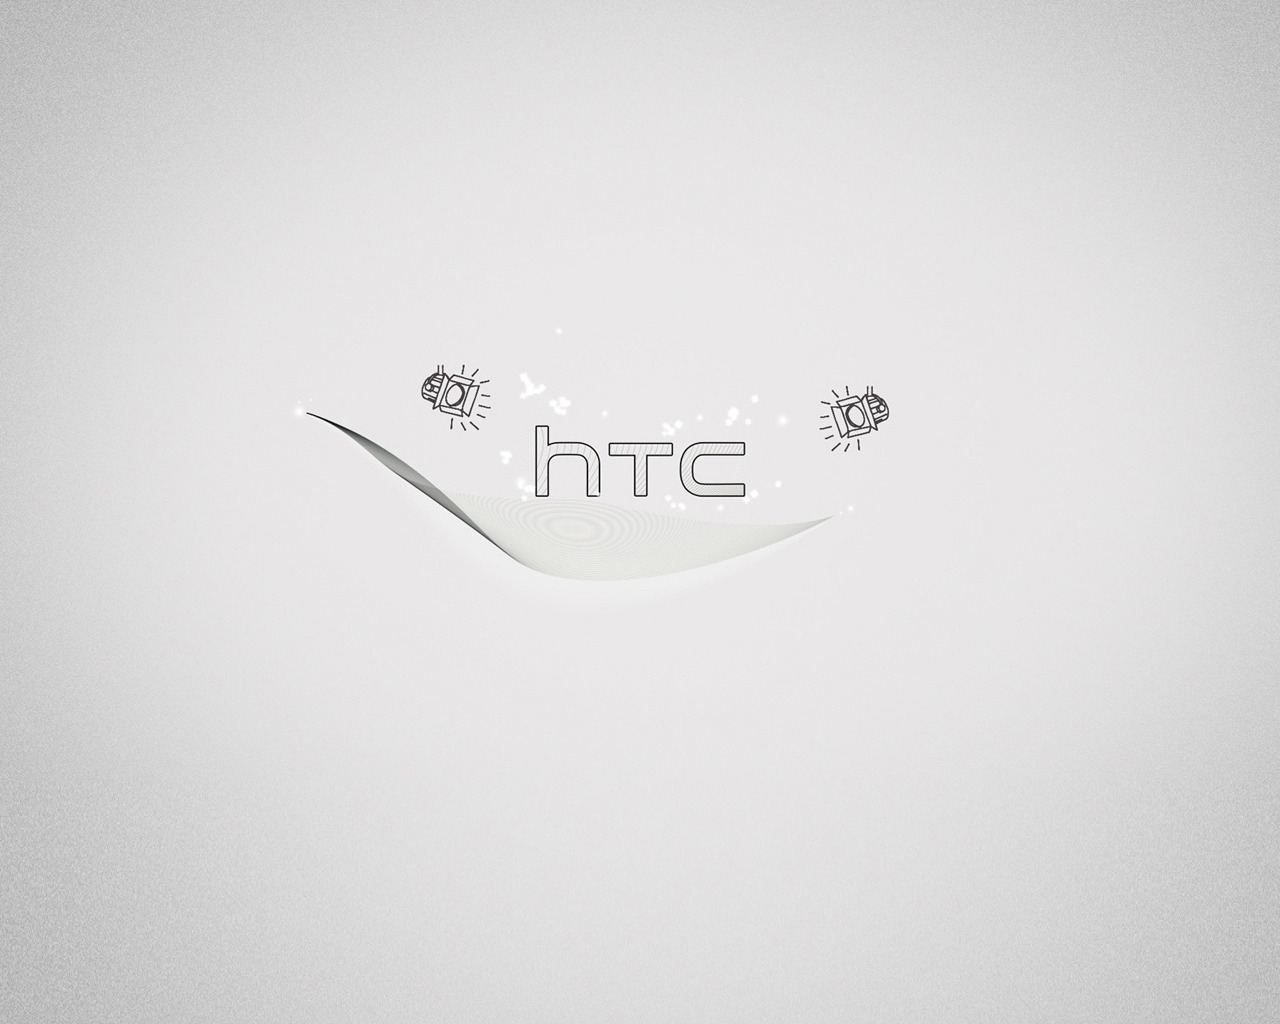 Cool HTC Logo for 1280 x 1024 resolution